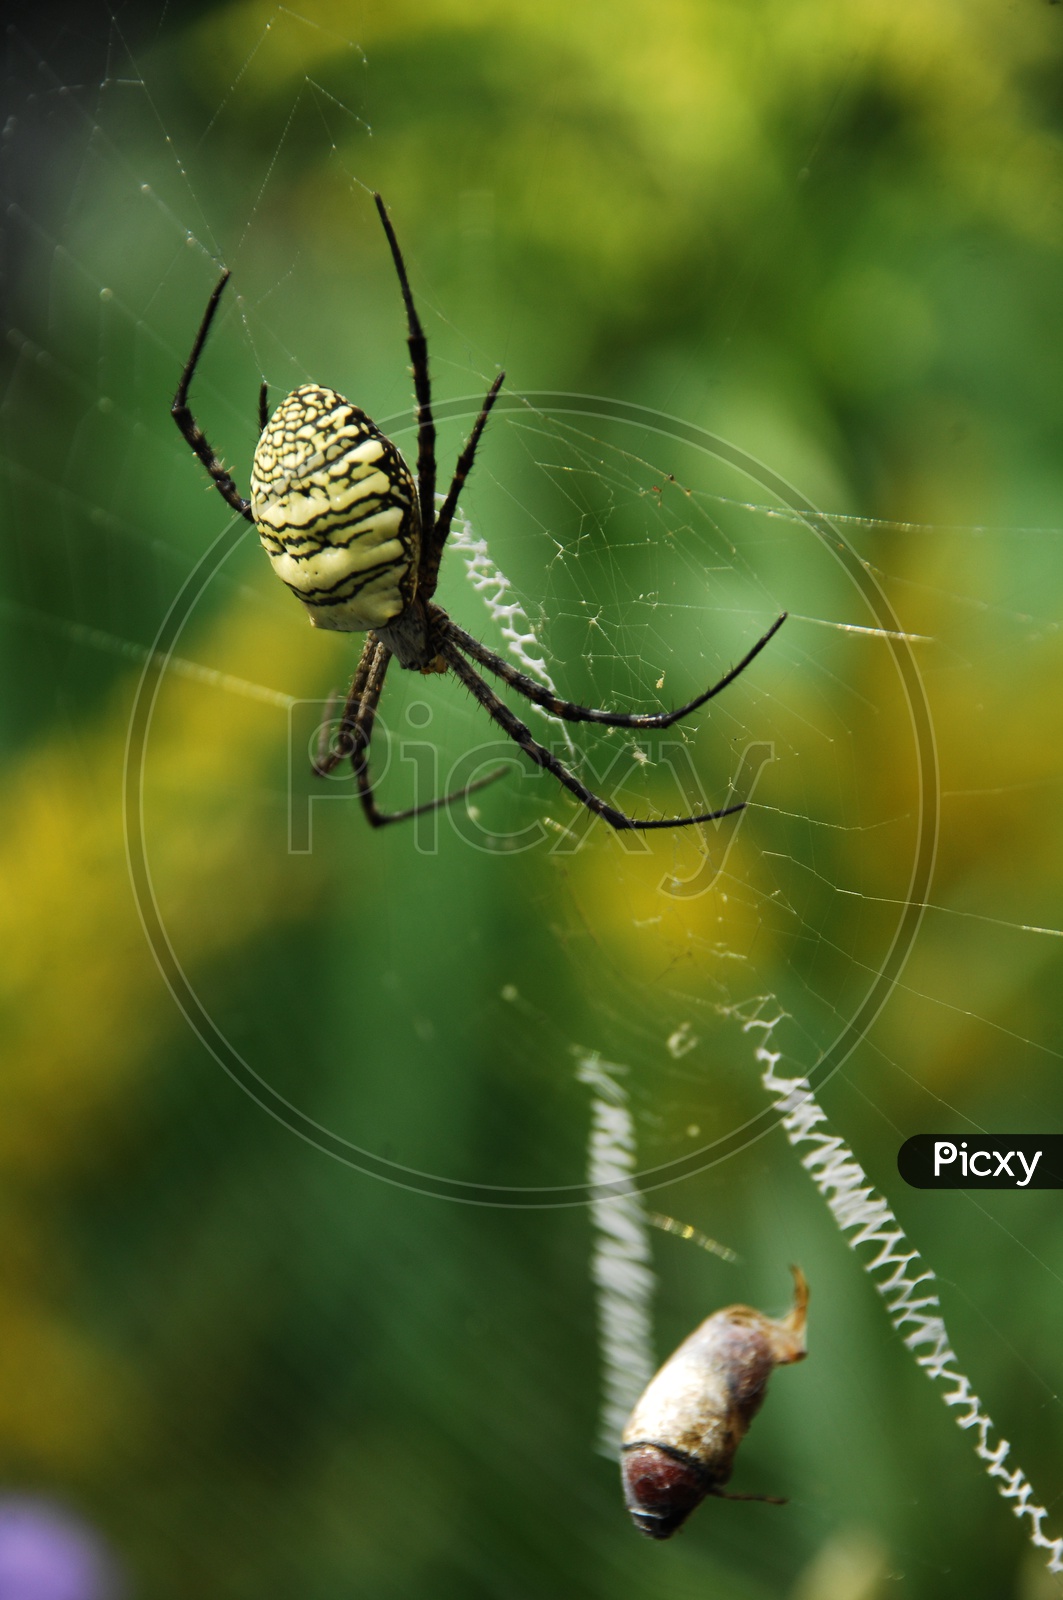 A Spider catching its prey in web